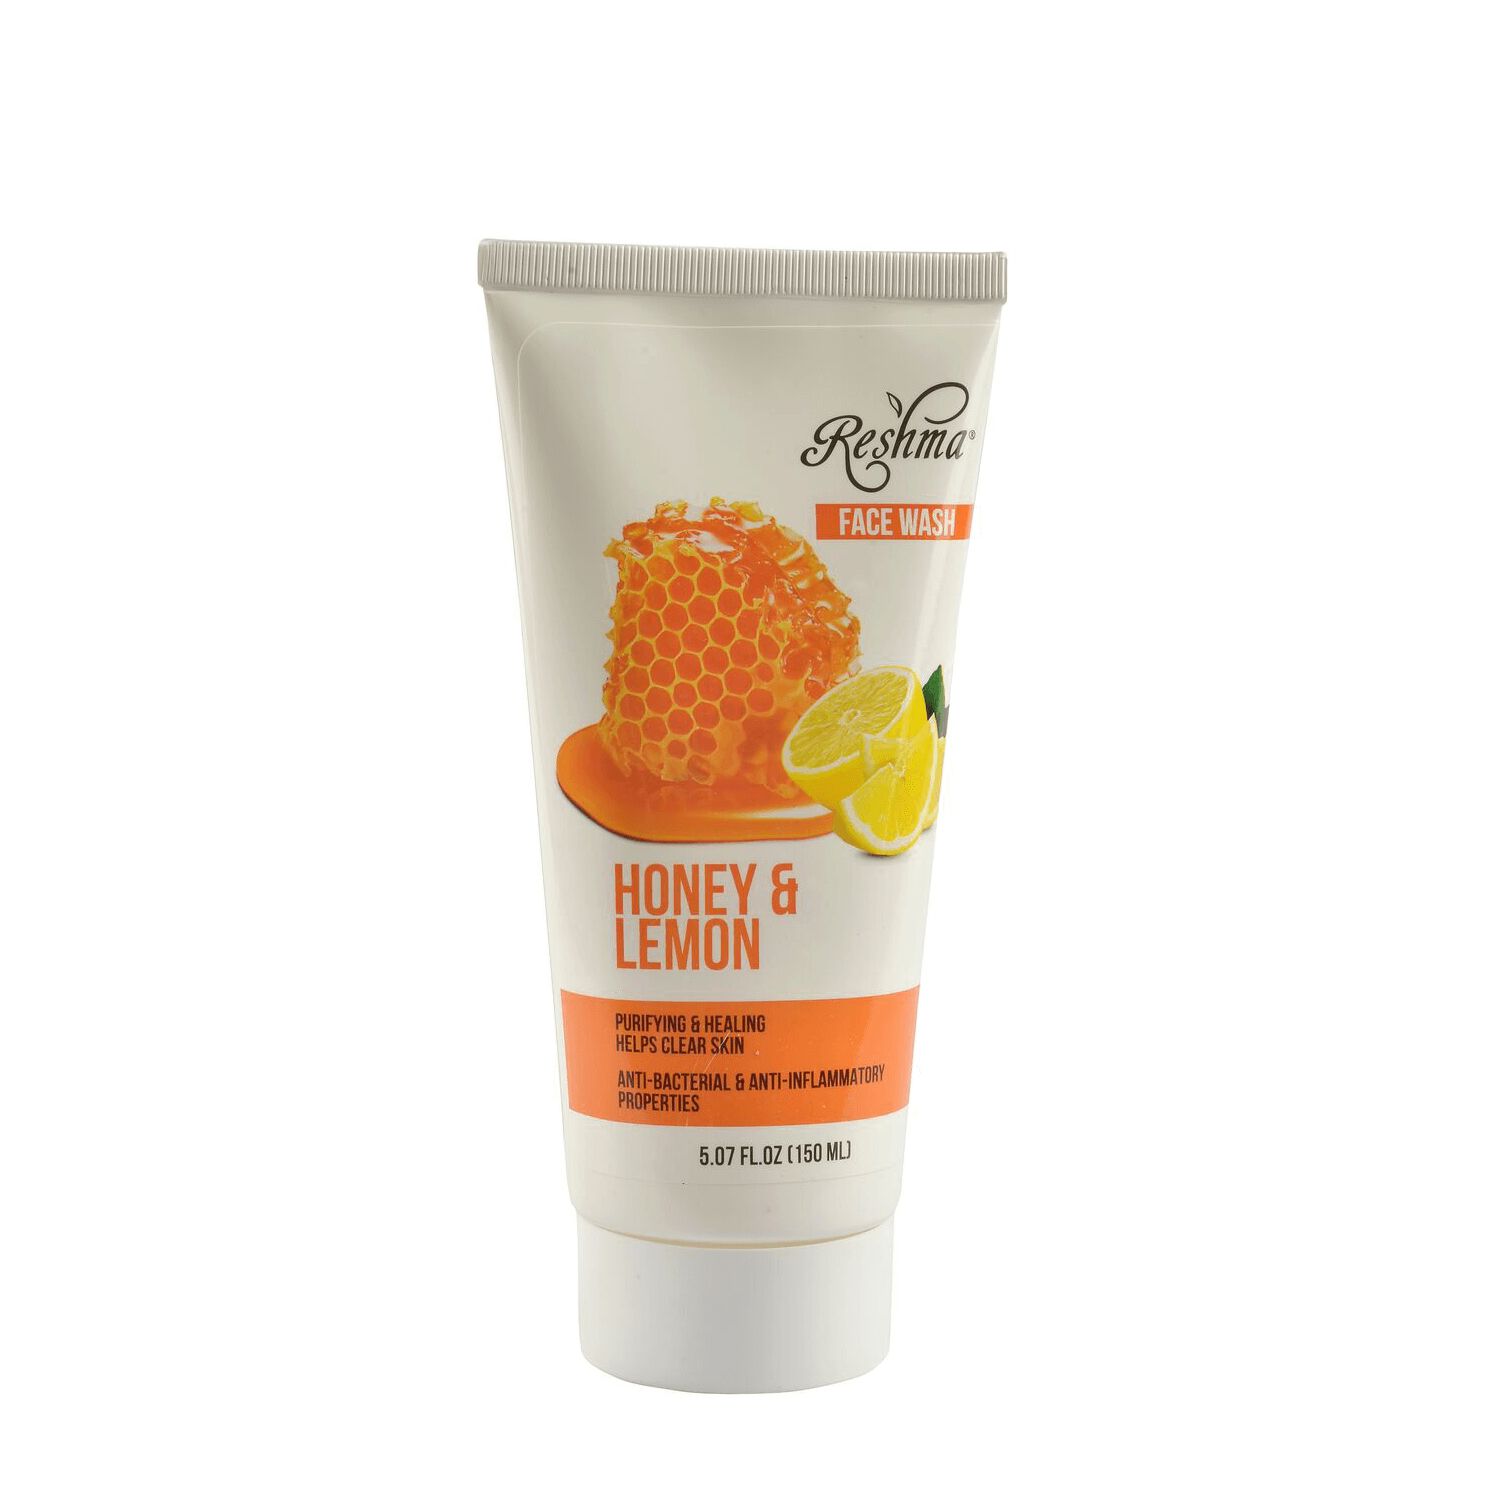 Reshma Beauty Honey and Lemon Face Wash - best facial cleanser for dry skin